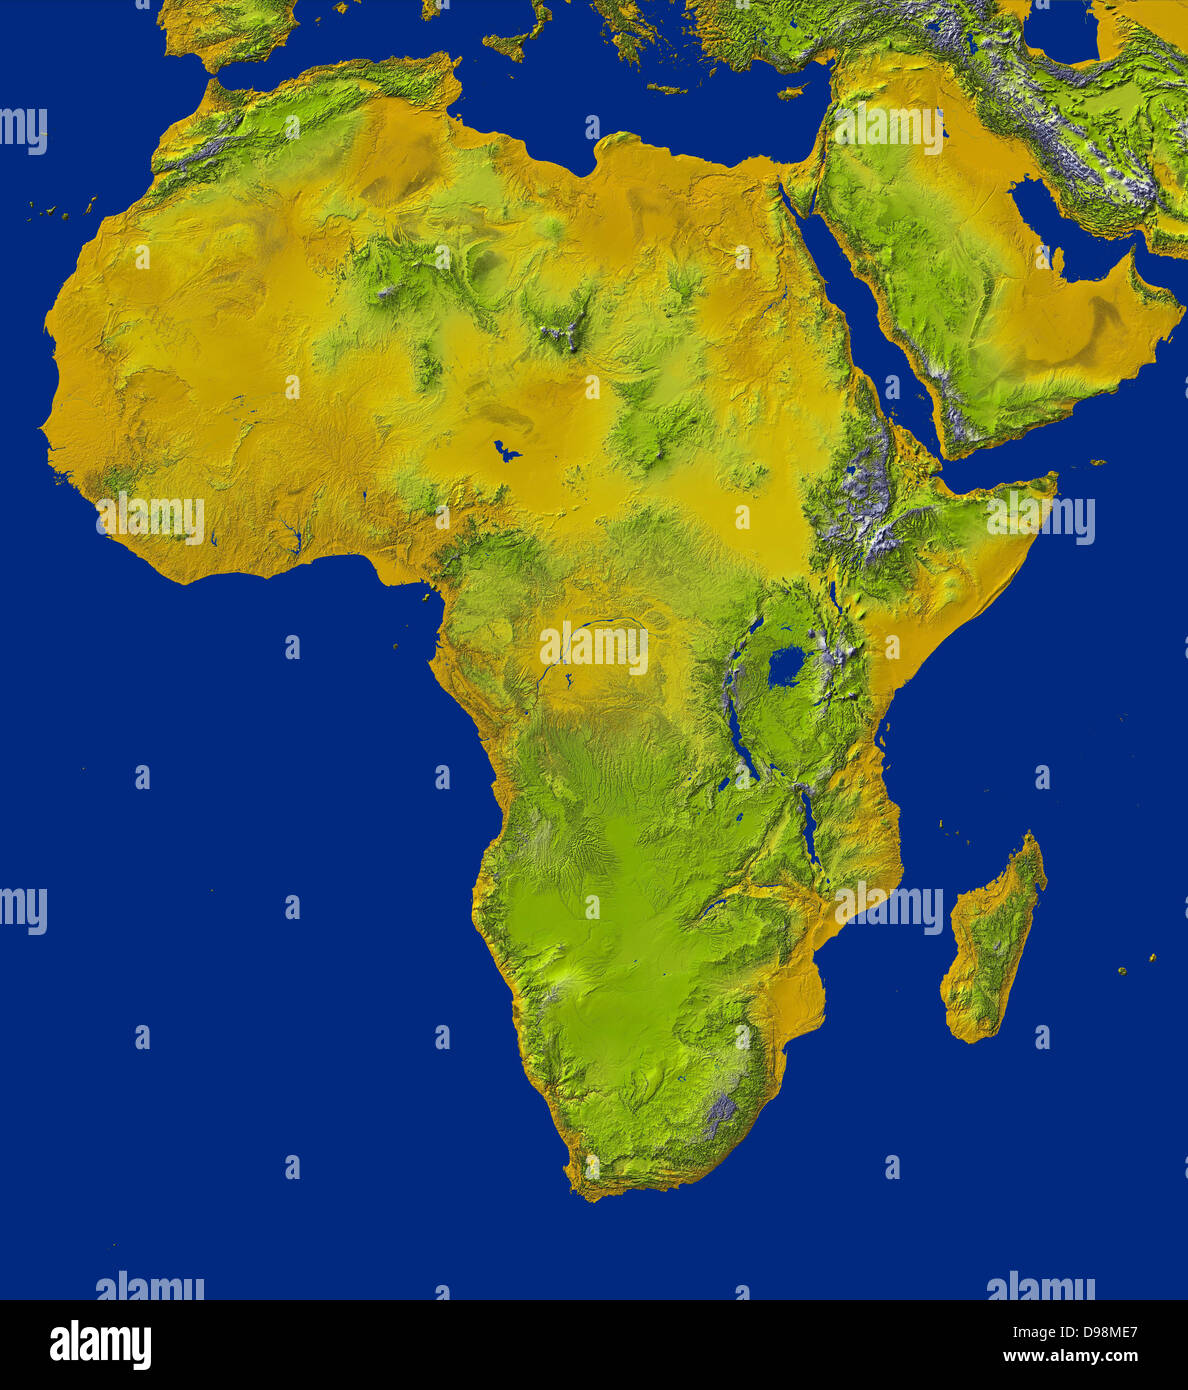 shaded relief image shows the extent of digital elevation data for Africa recently released by the Shuttle Radar Topography Stock Photo